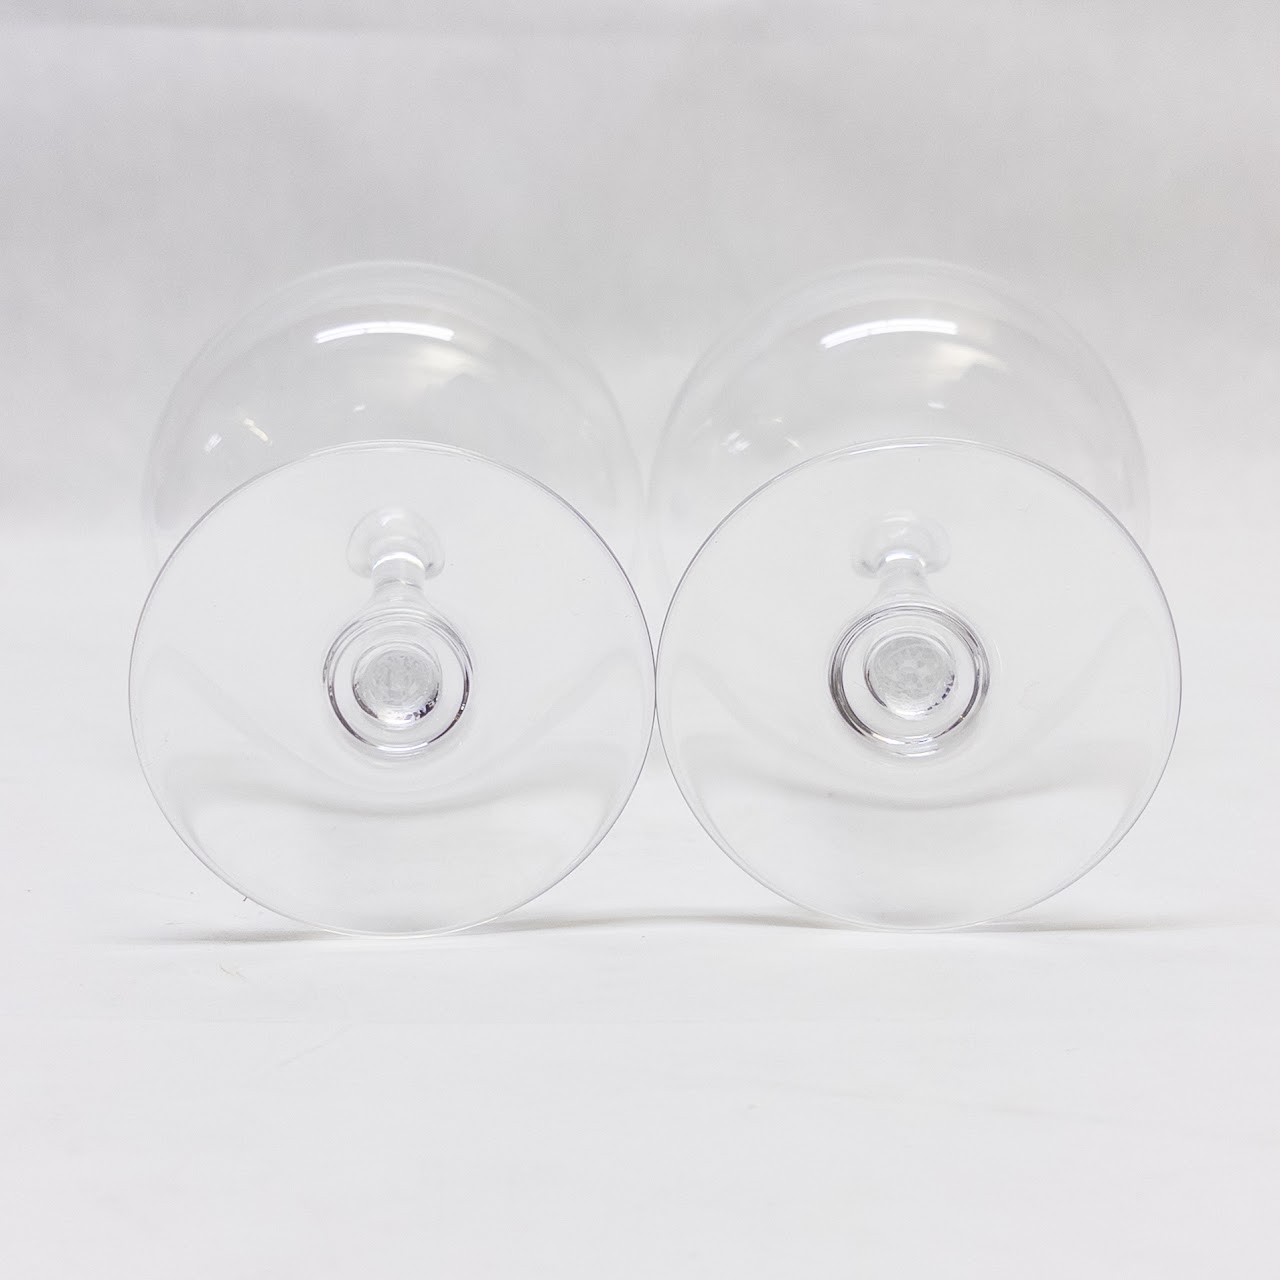 Baccarat Perfection Coupe Glass Pair # 3